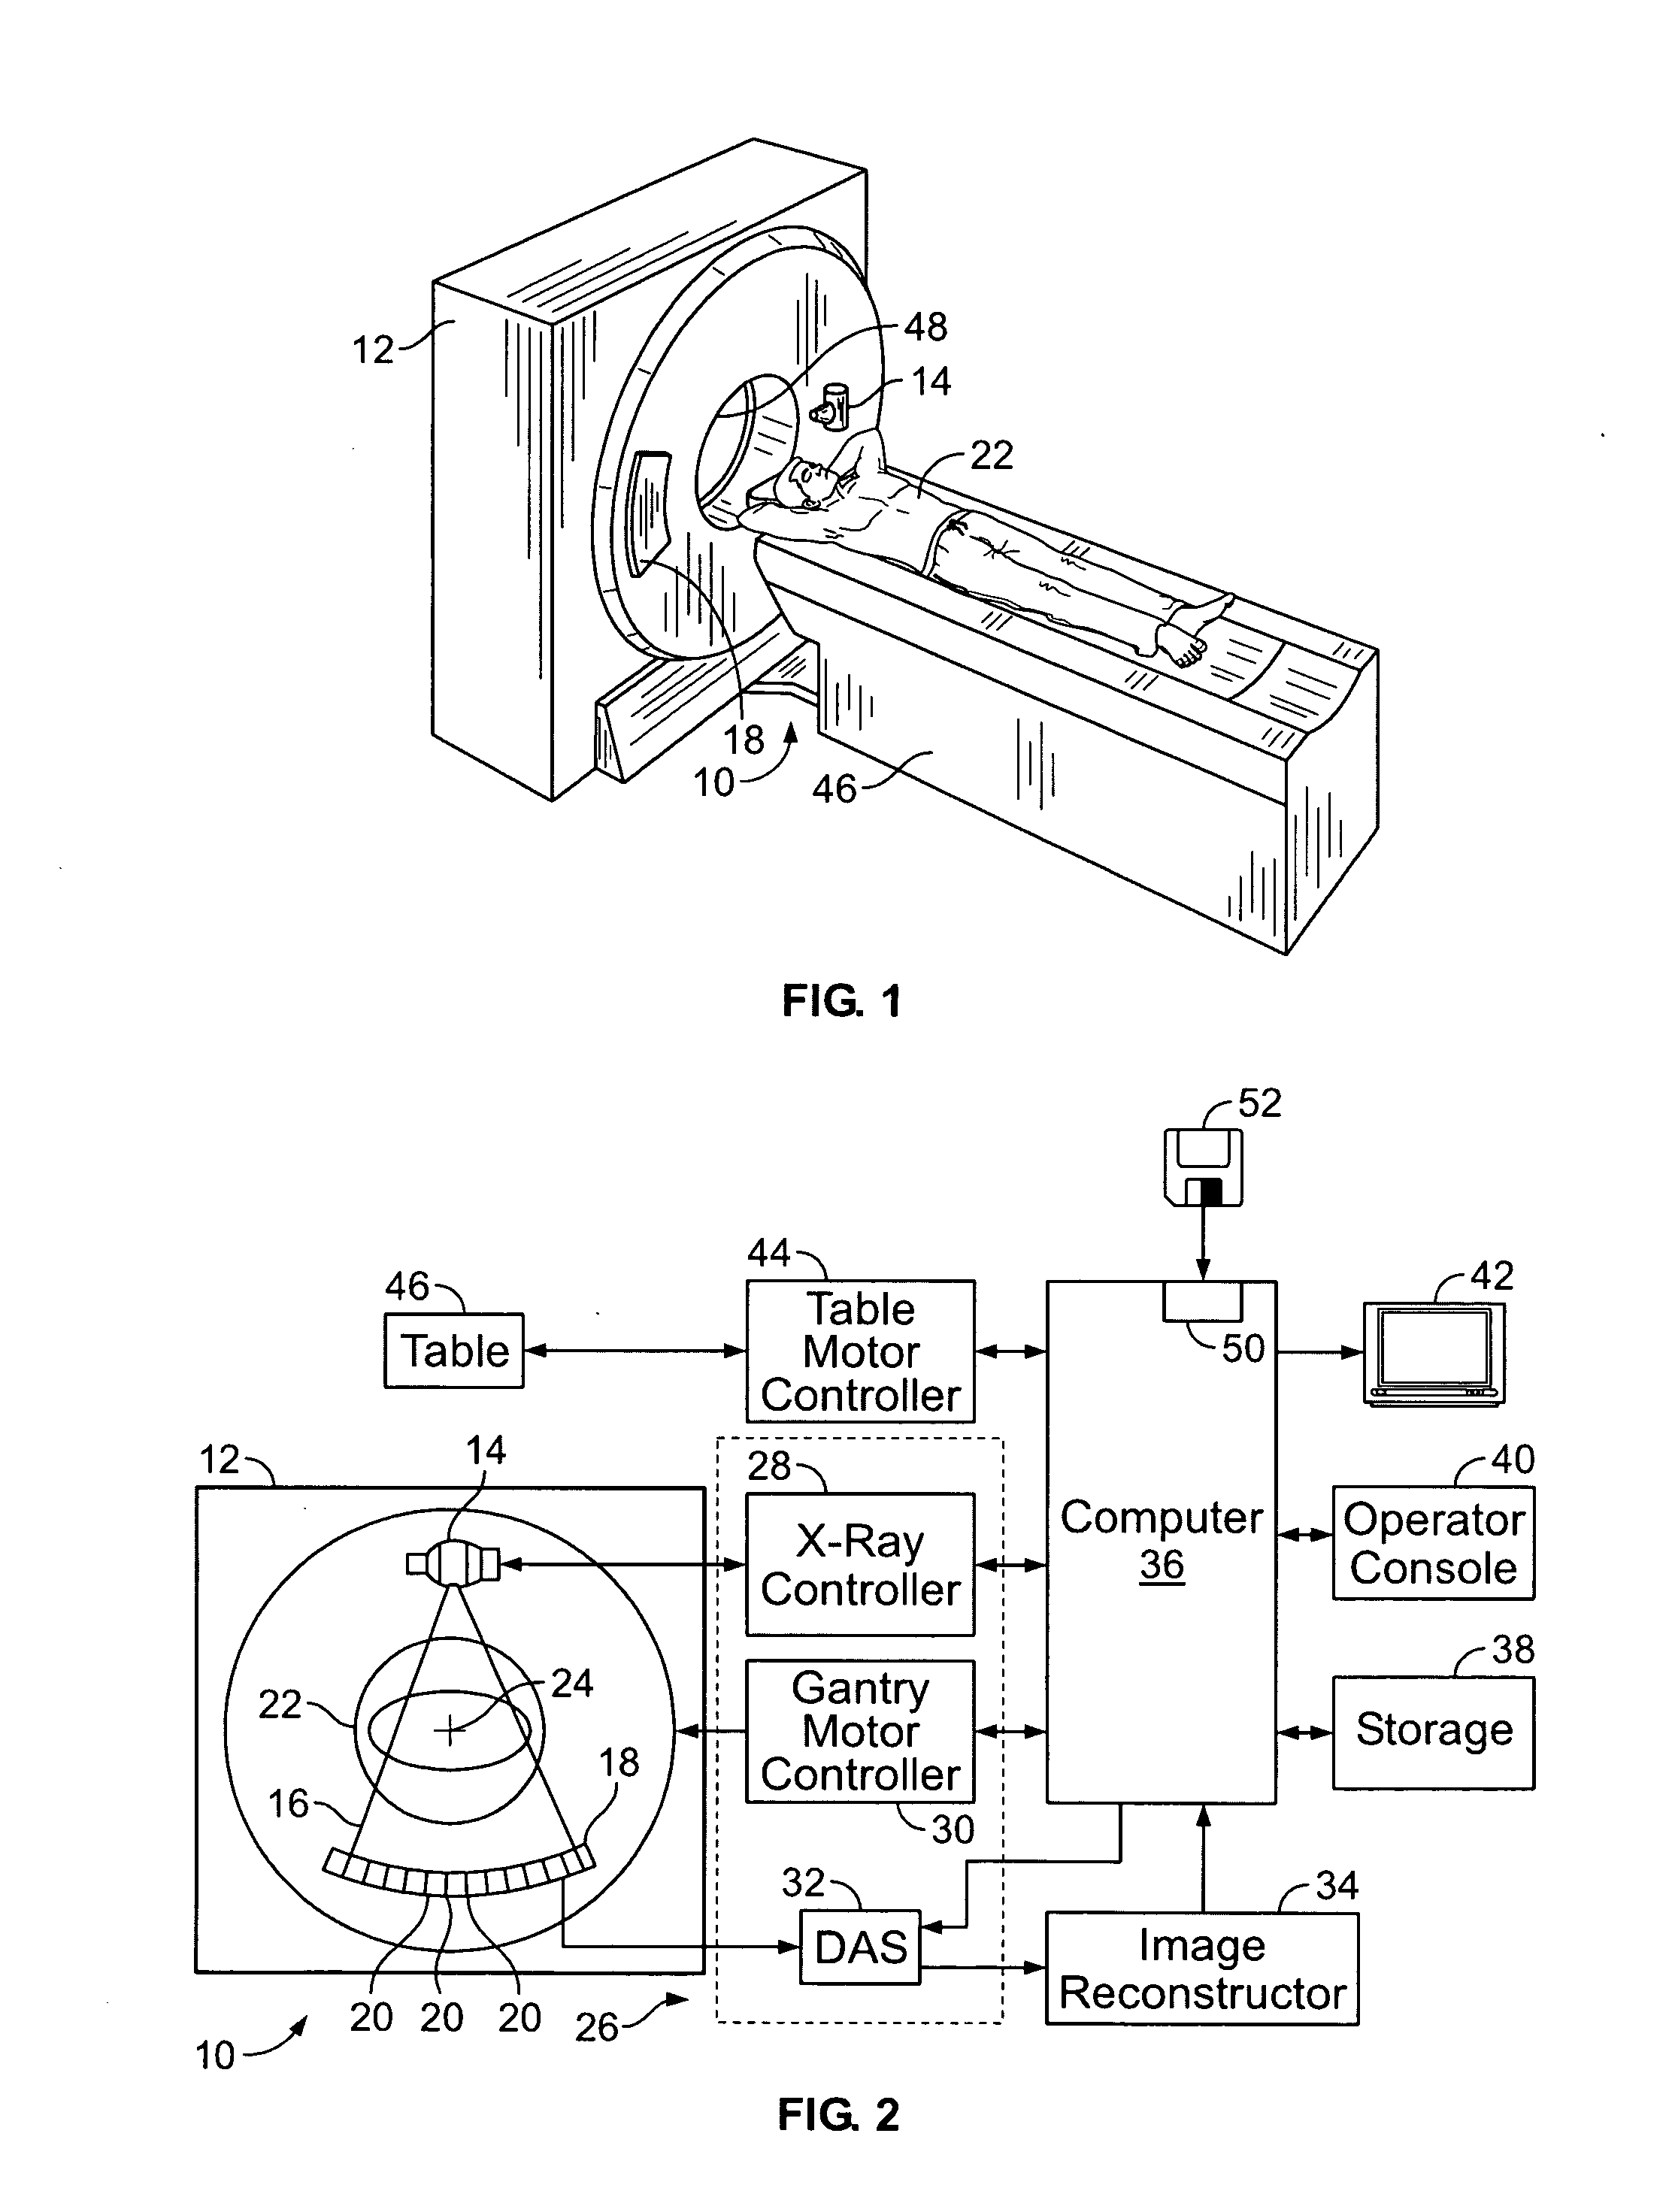 Method and apparatus for field-of-view expansion of volumetric CT imaging